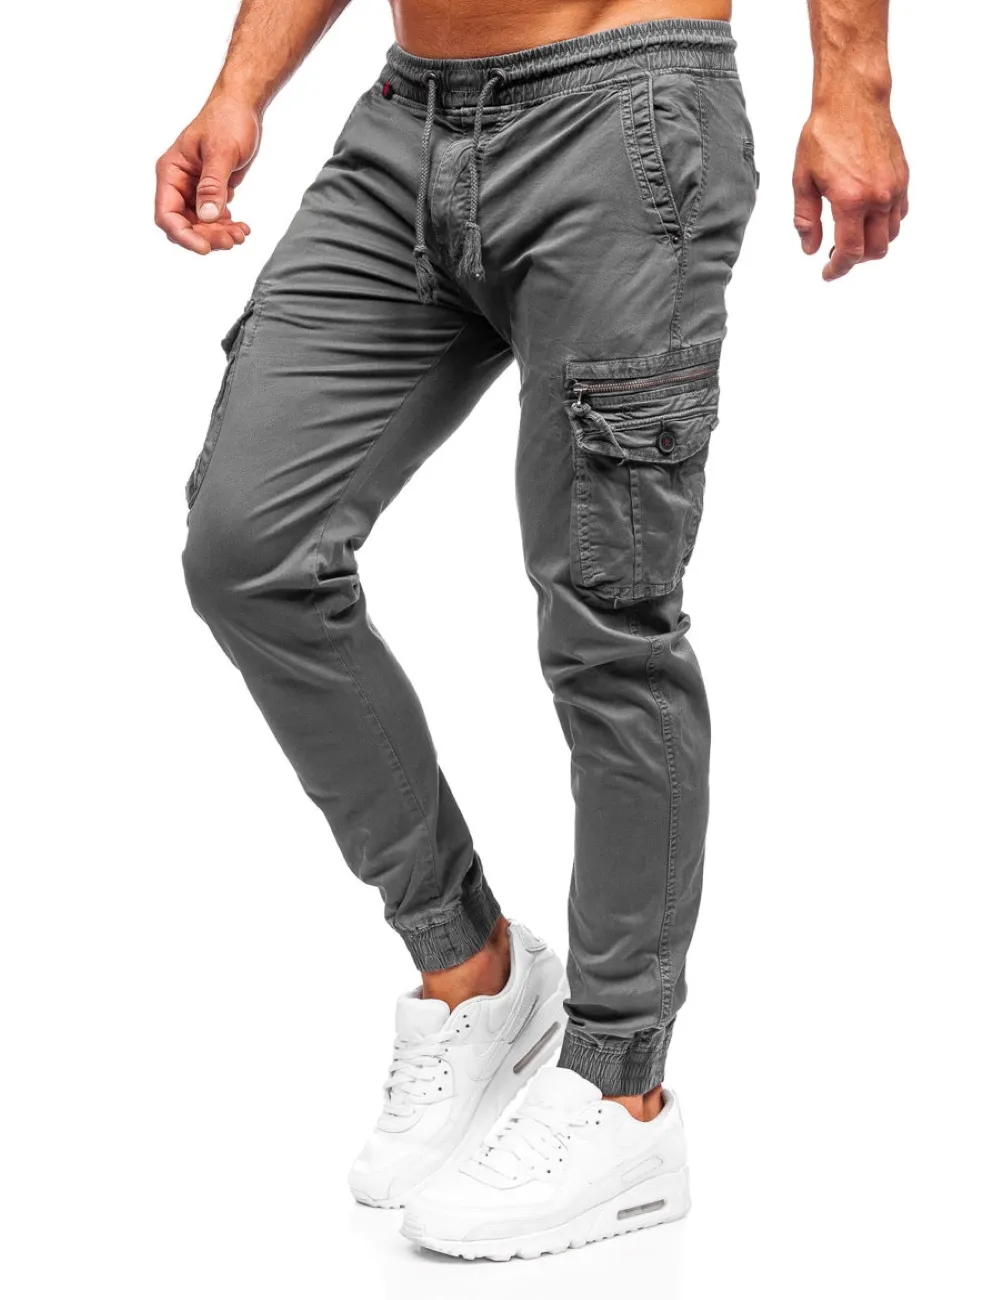 Cargo Pants For Men Cargo Trouser Joggers Grey Color Customized Design High Quality 100% Cotton Fabric